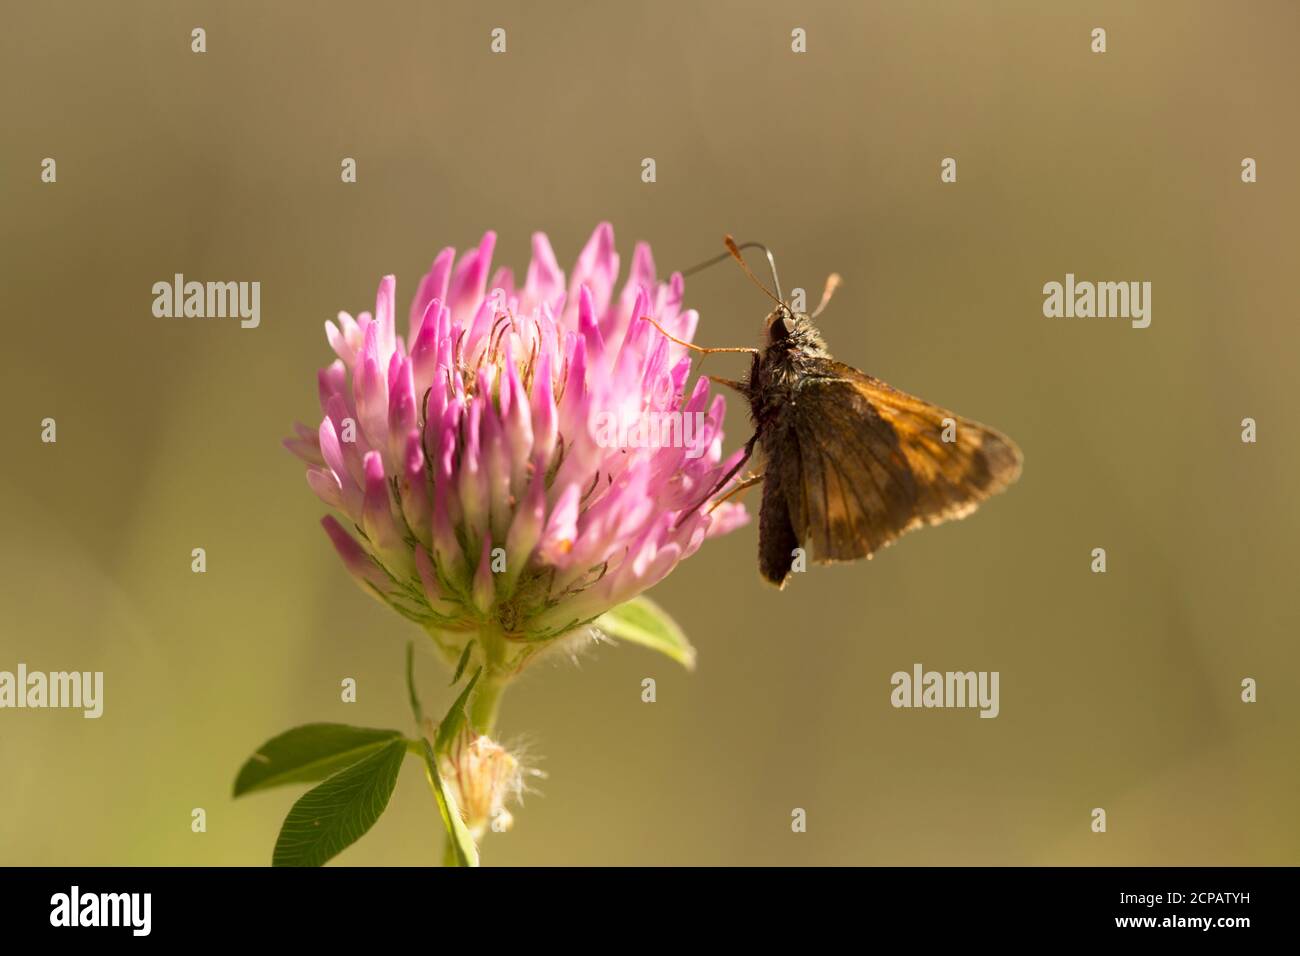 Butterfly on red clover, natural brownish background Stock Photo